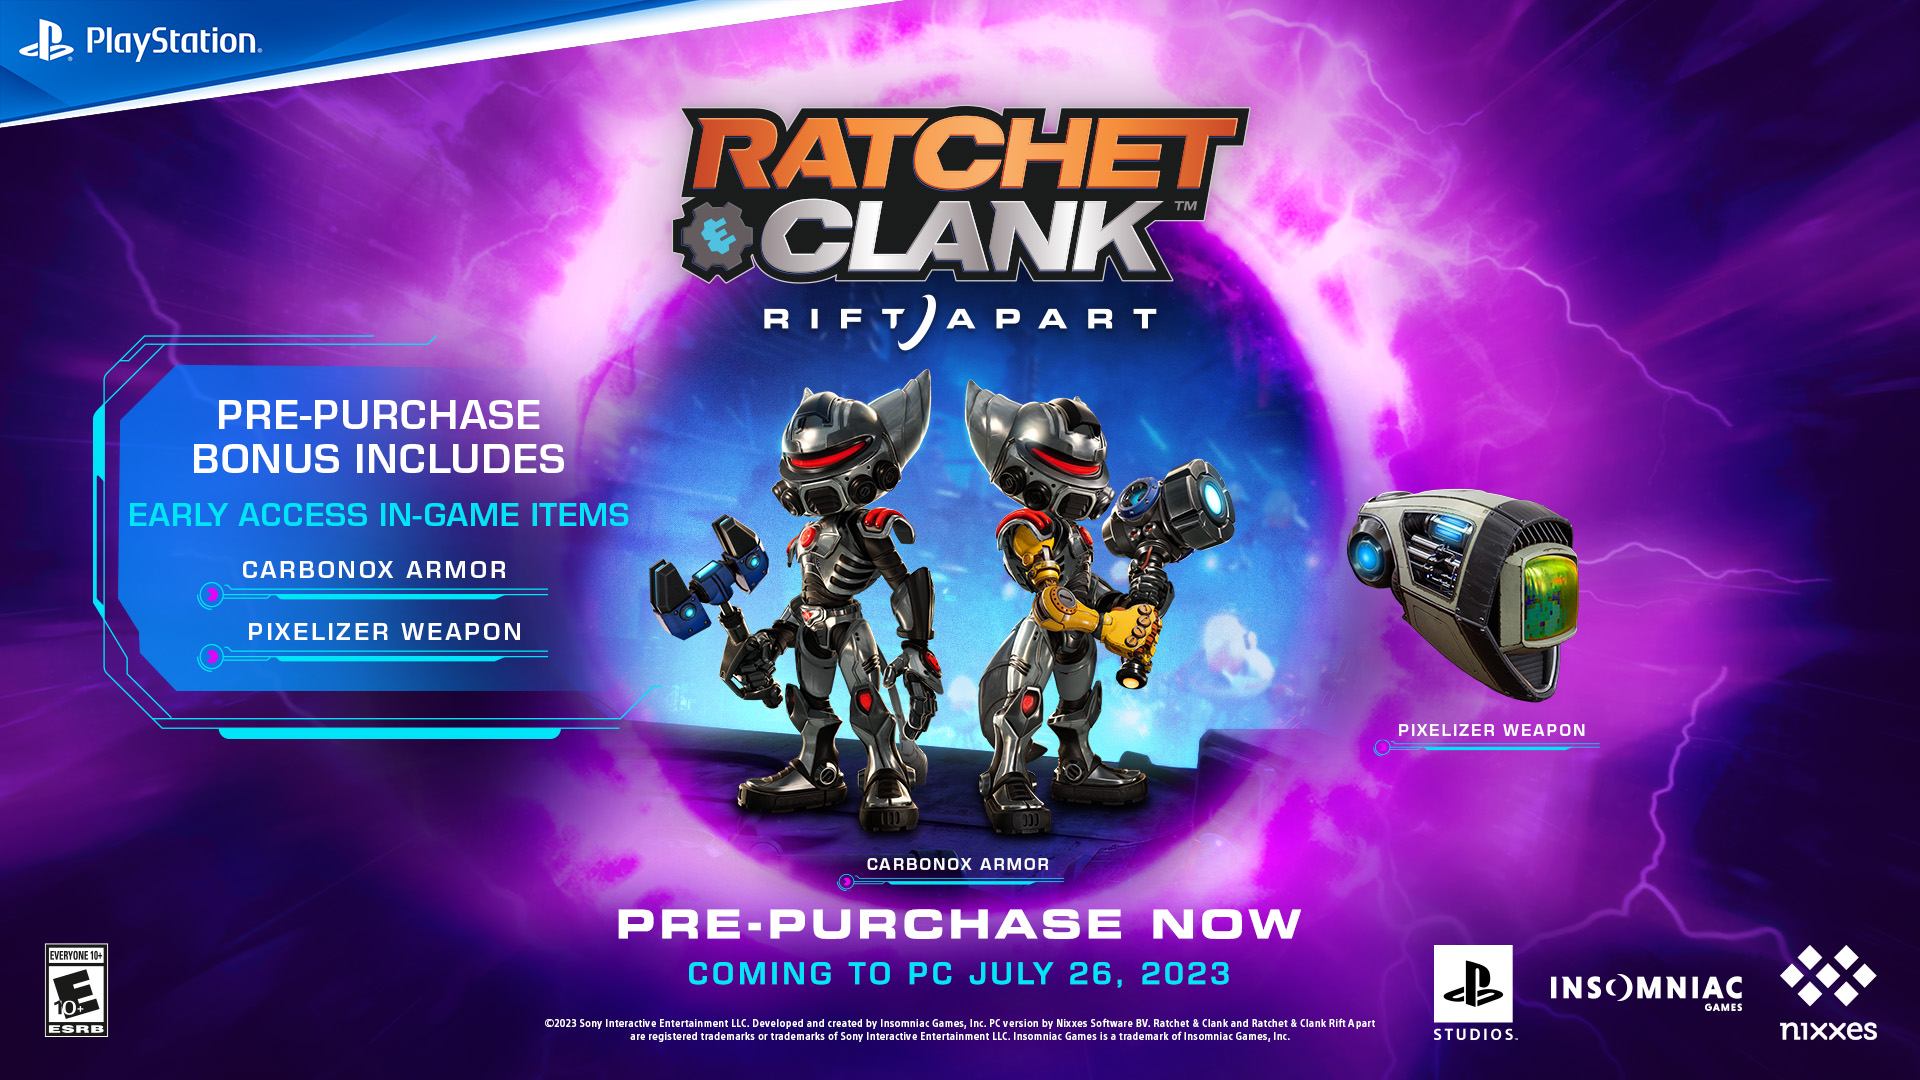 Ratchet & Clank: Rift Apart Debuts In PC This July 26th 23